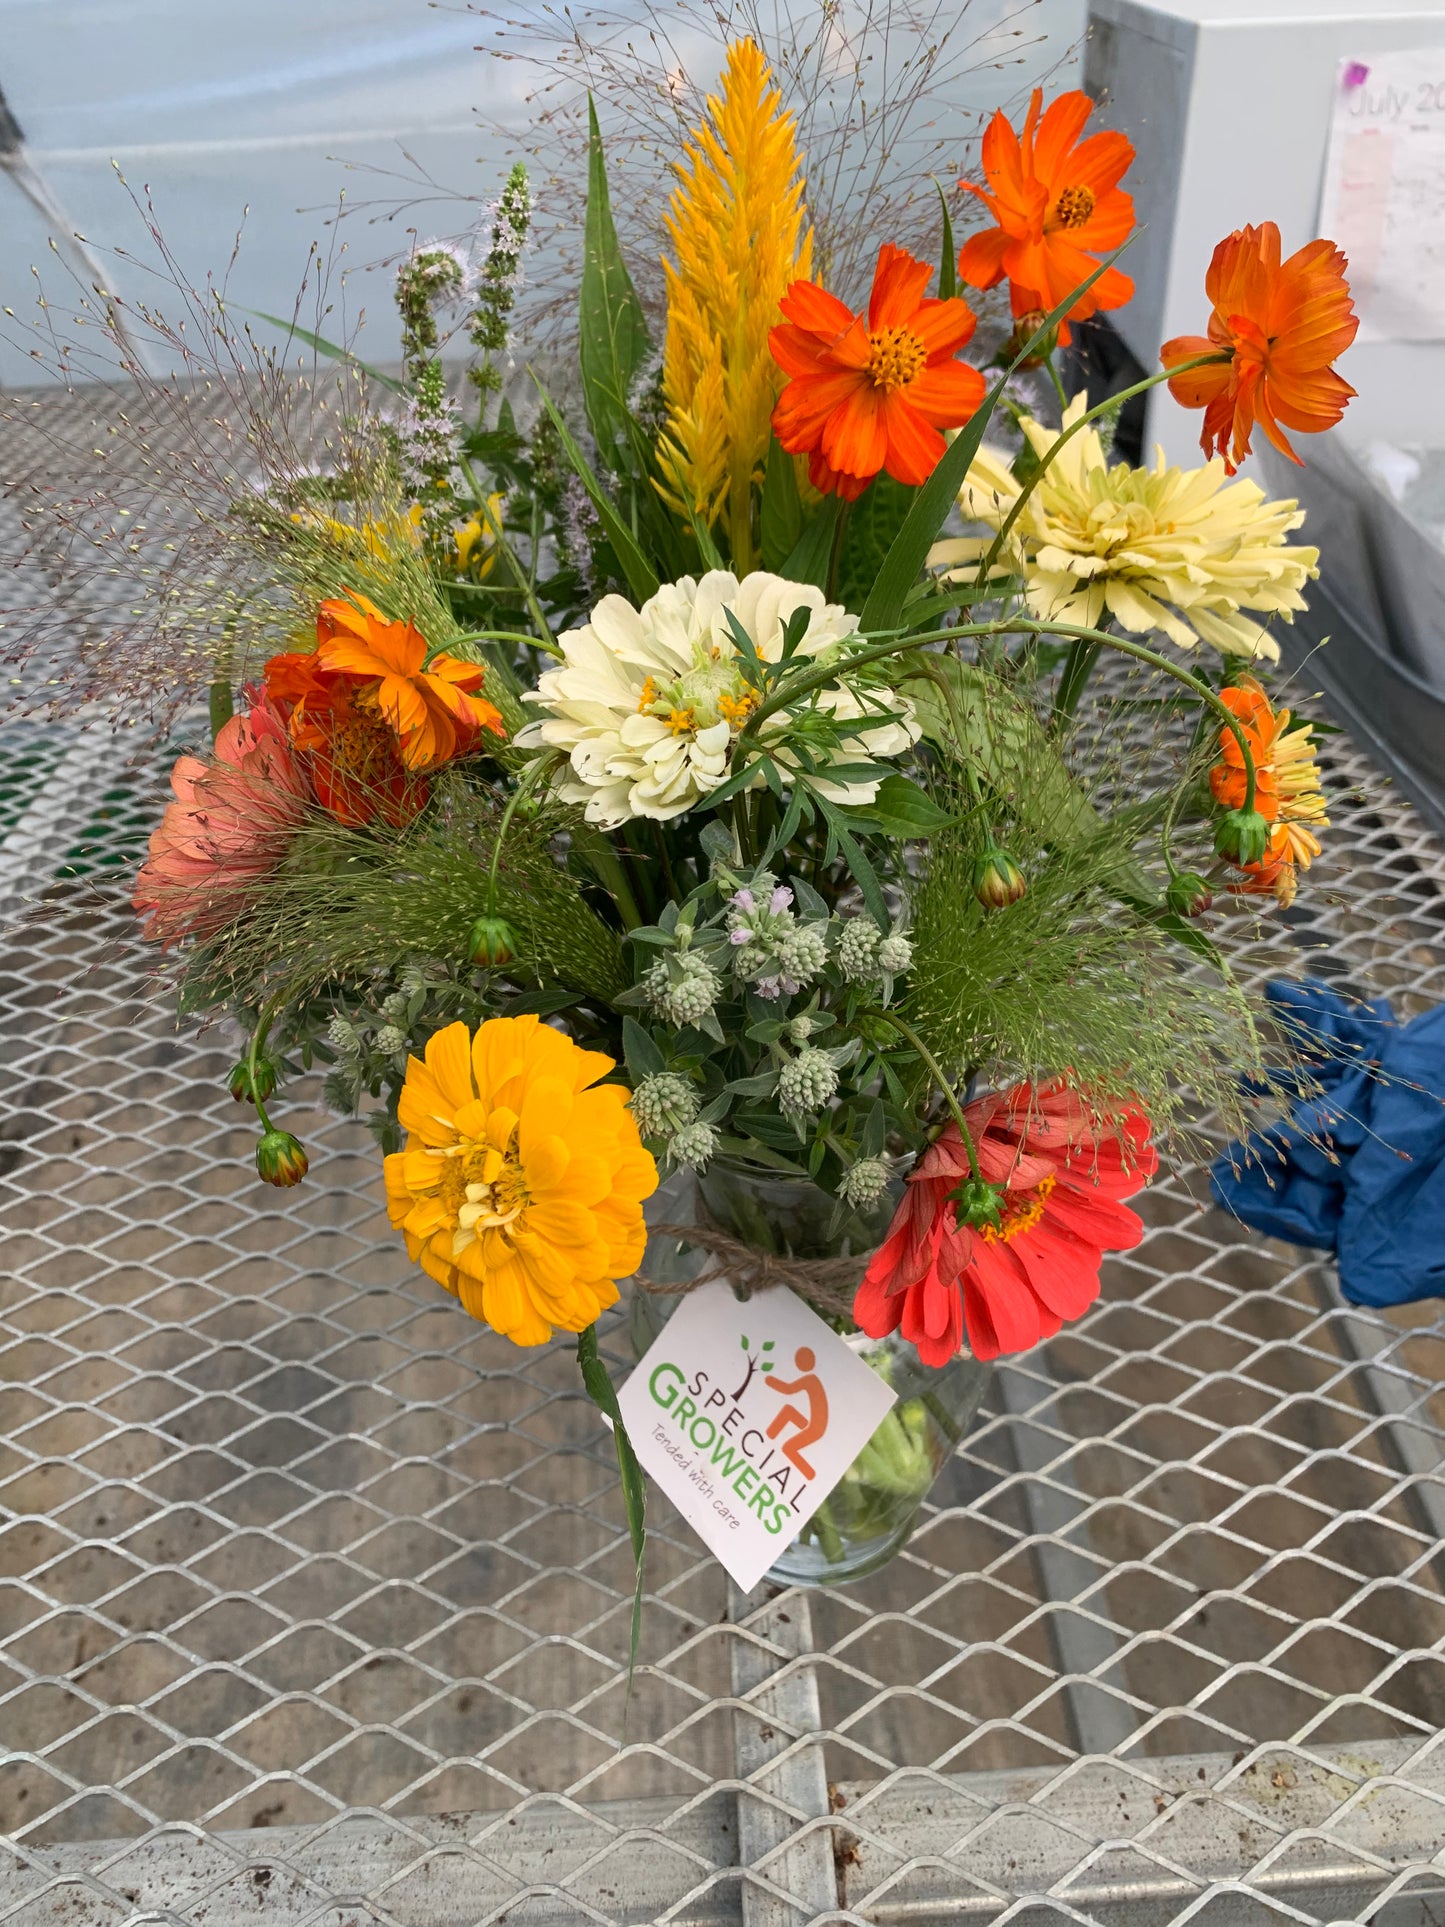 Monthly Bouquet Delivery Subscription